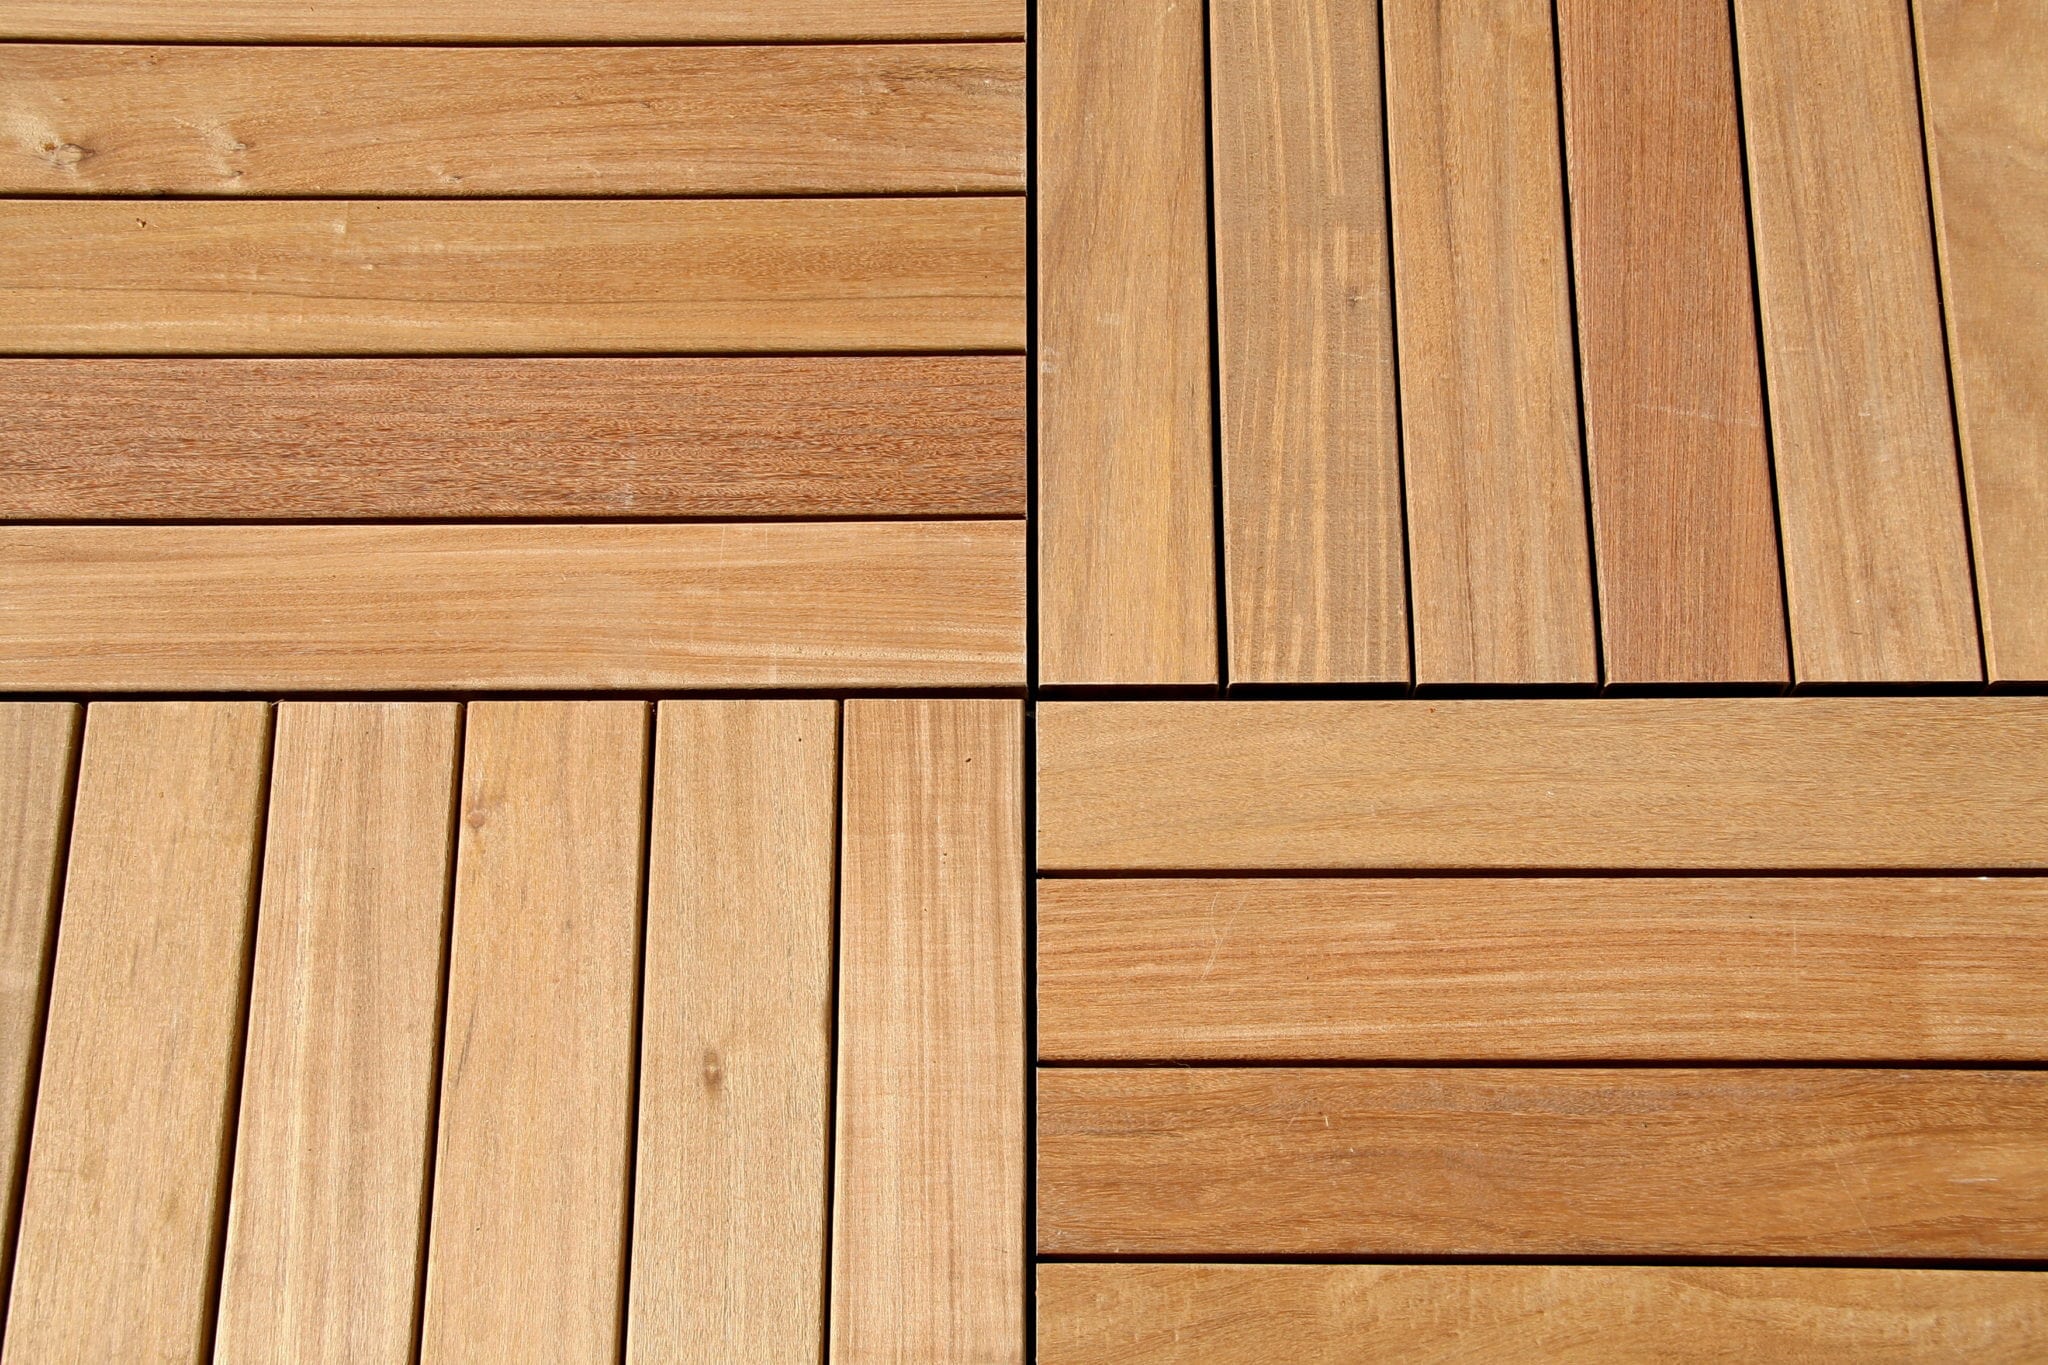 Small Deck with a Large View ipe wood decking tile detail